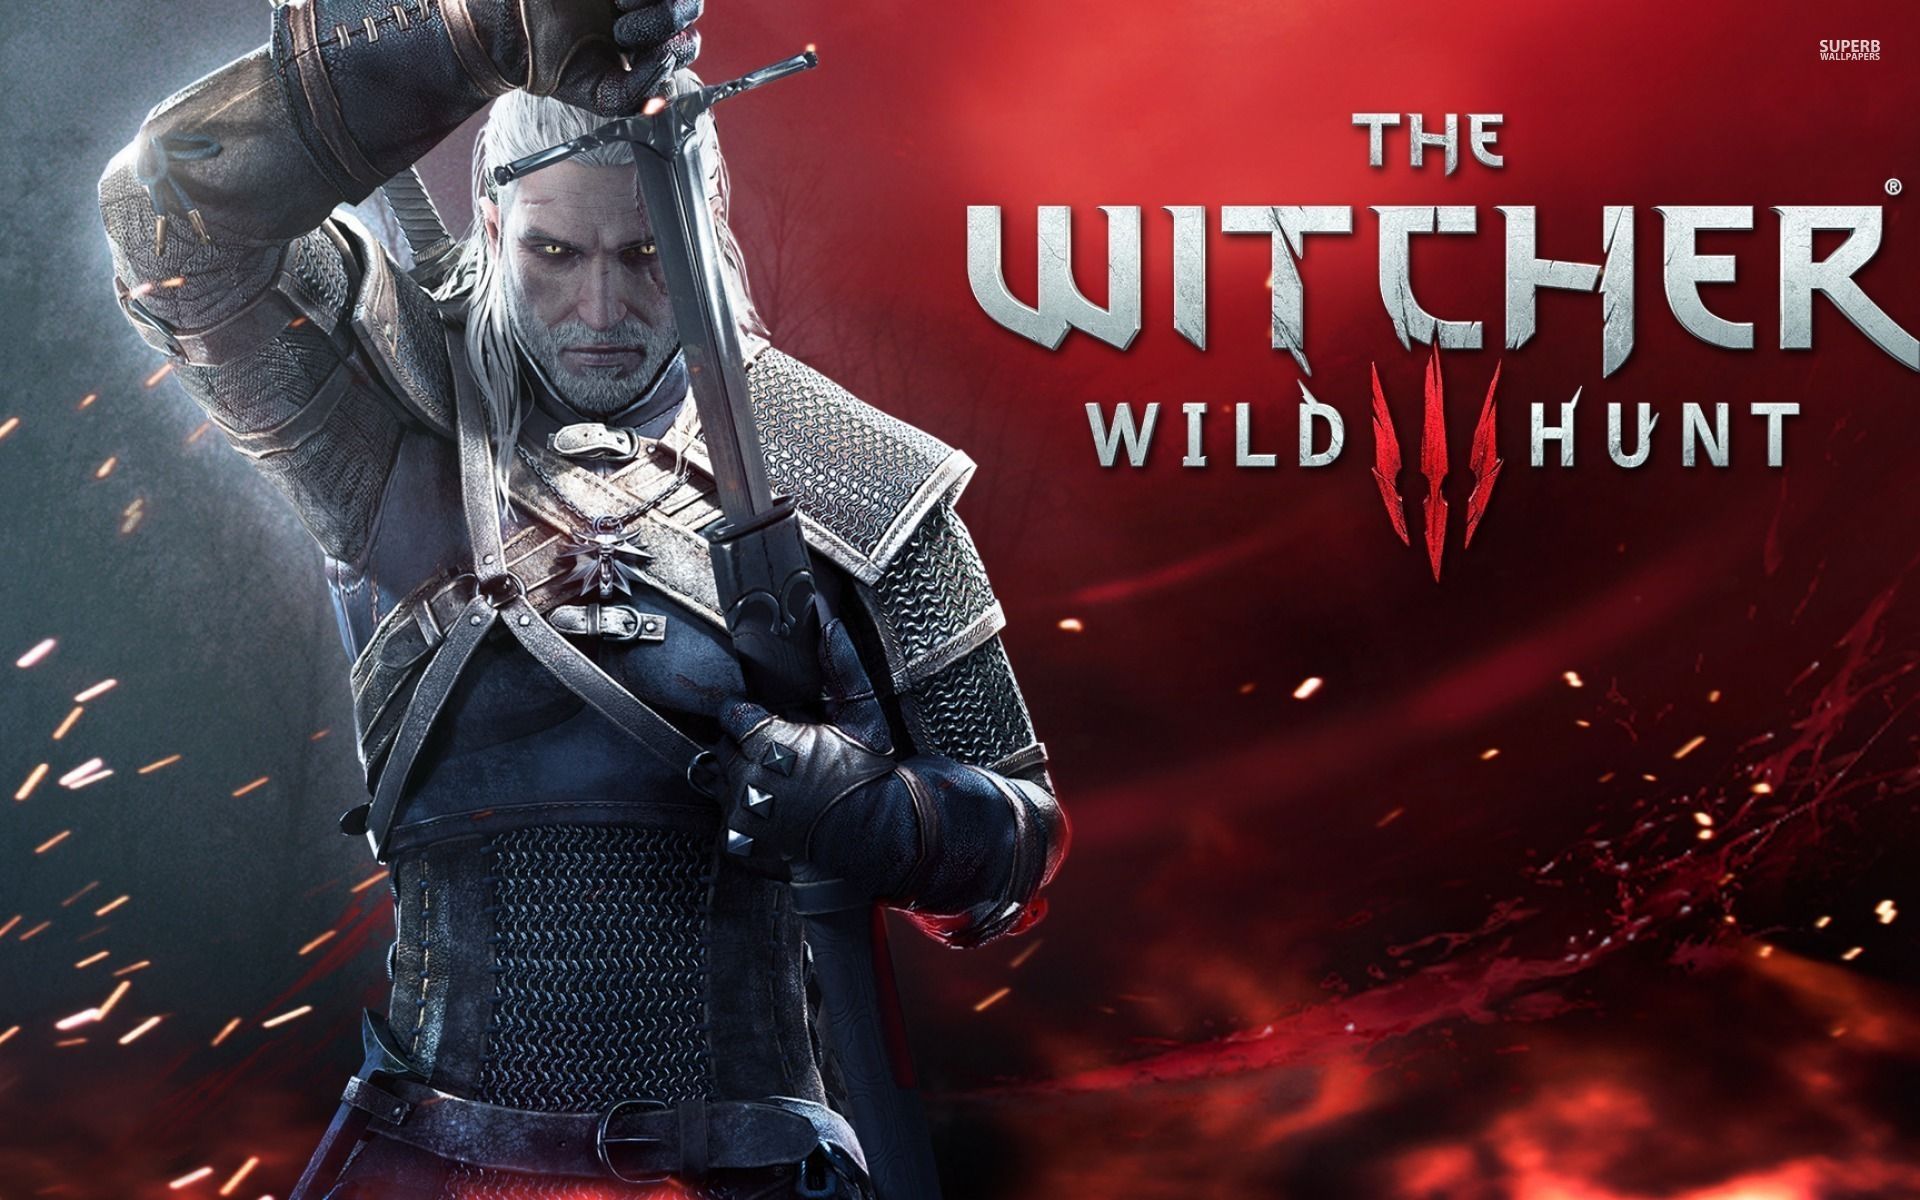 The Witcher 3: Wild Hunt wallpaper - Game wallpapers - #34658